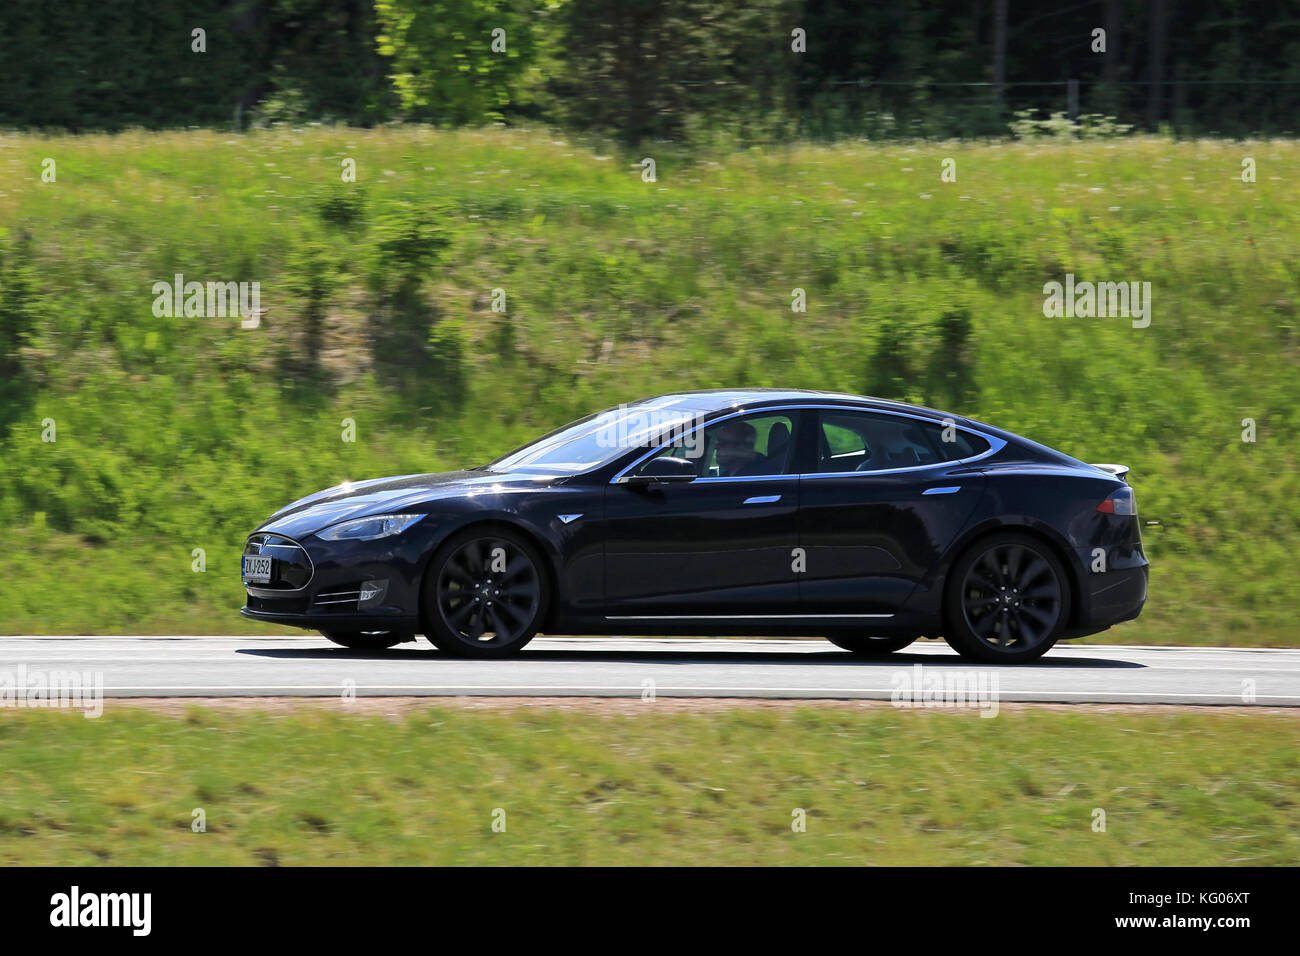 SALO, FINLAND - JUNE 3, 2016: Black Tesla Model S fully electric car at speed on the road at summer. In-camera panning effect. Stock Photo